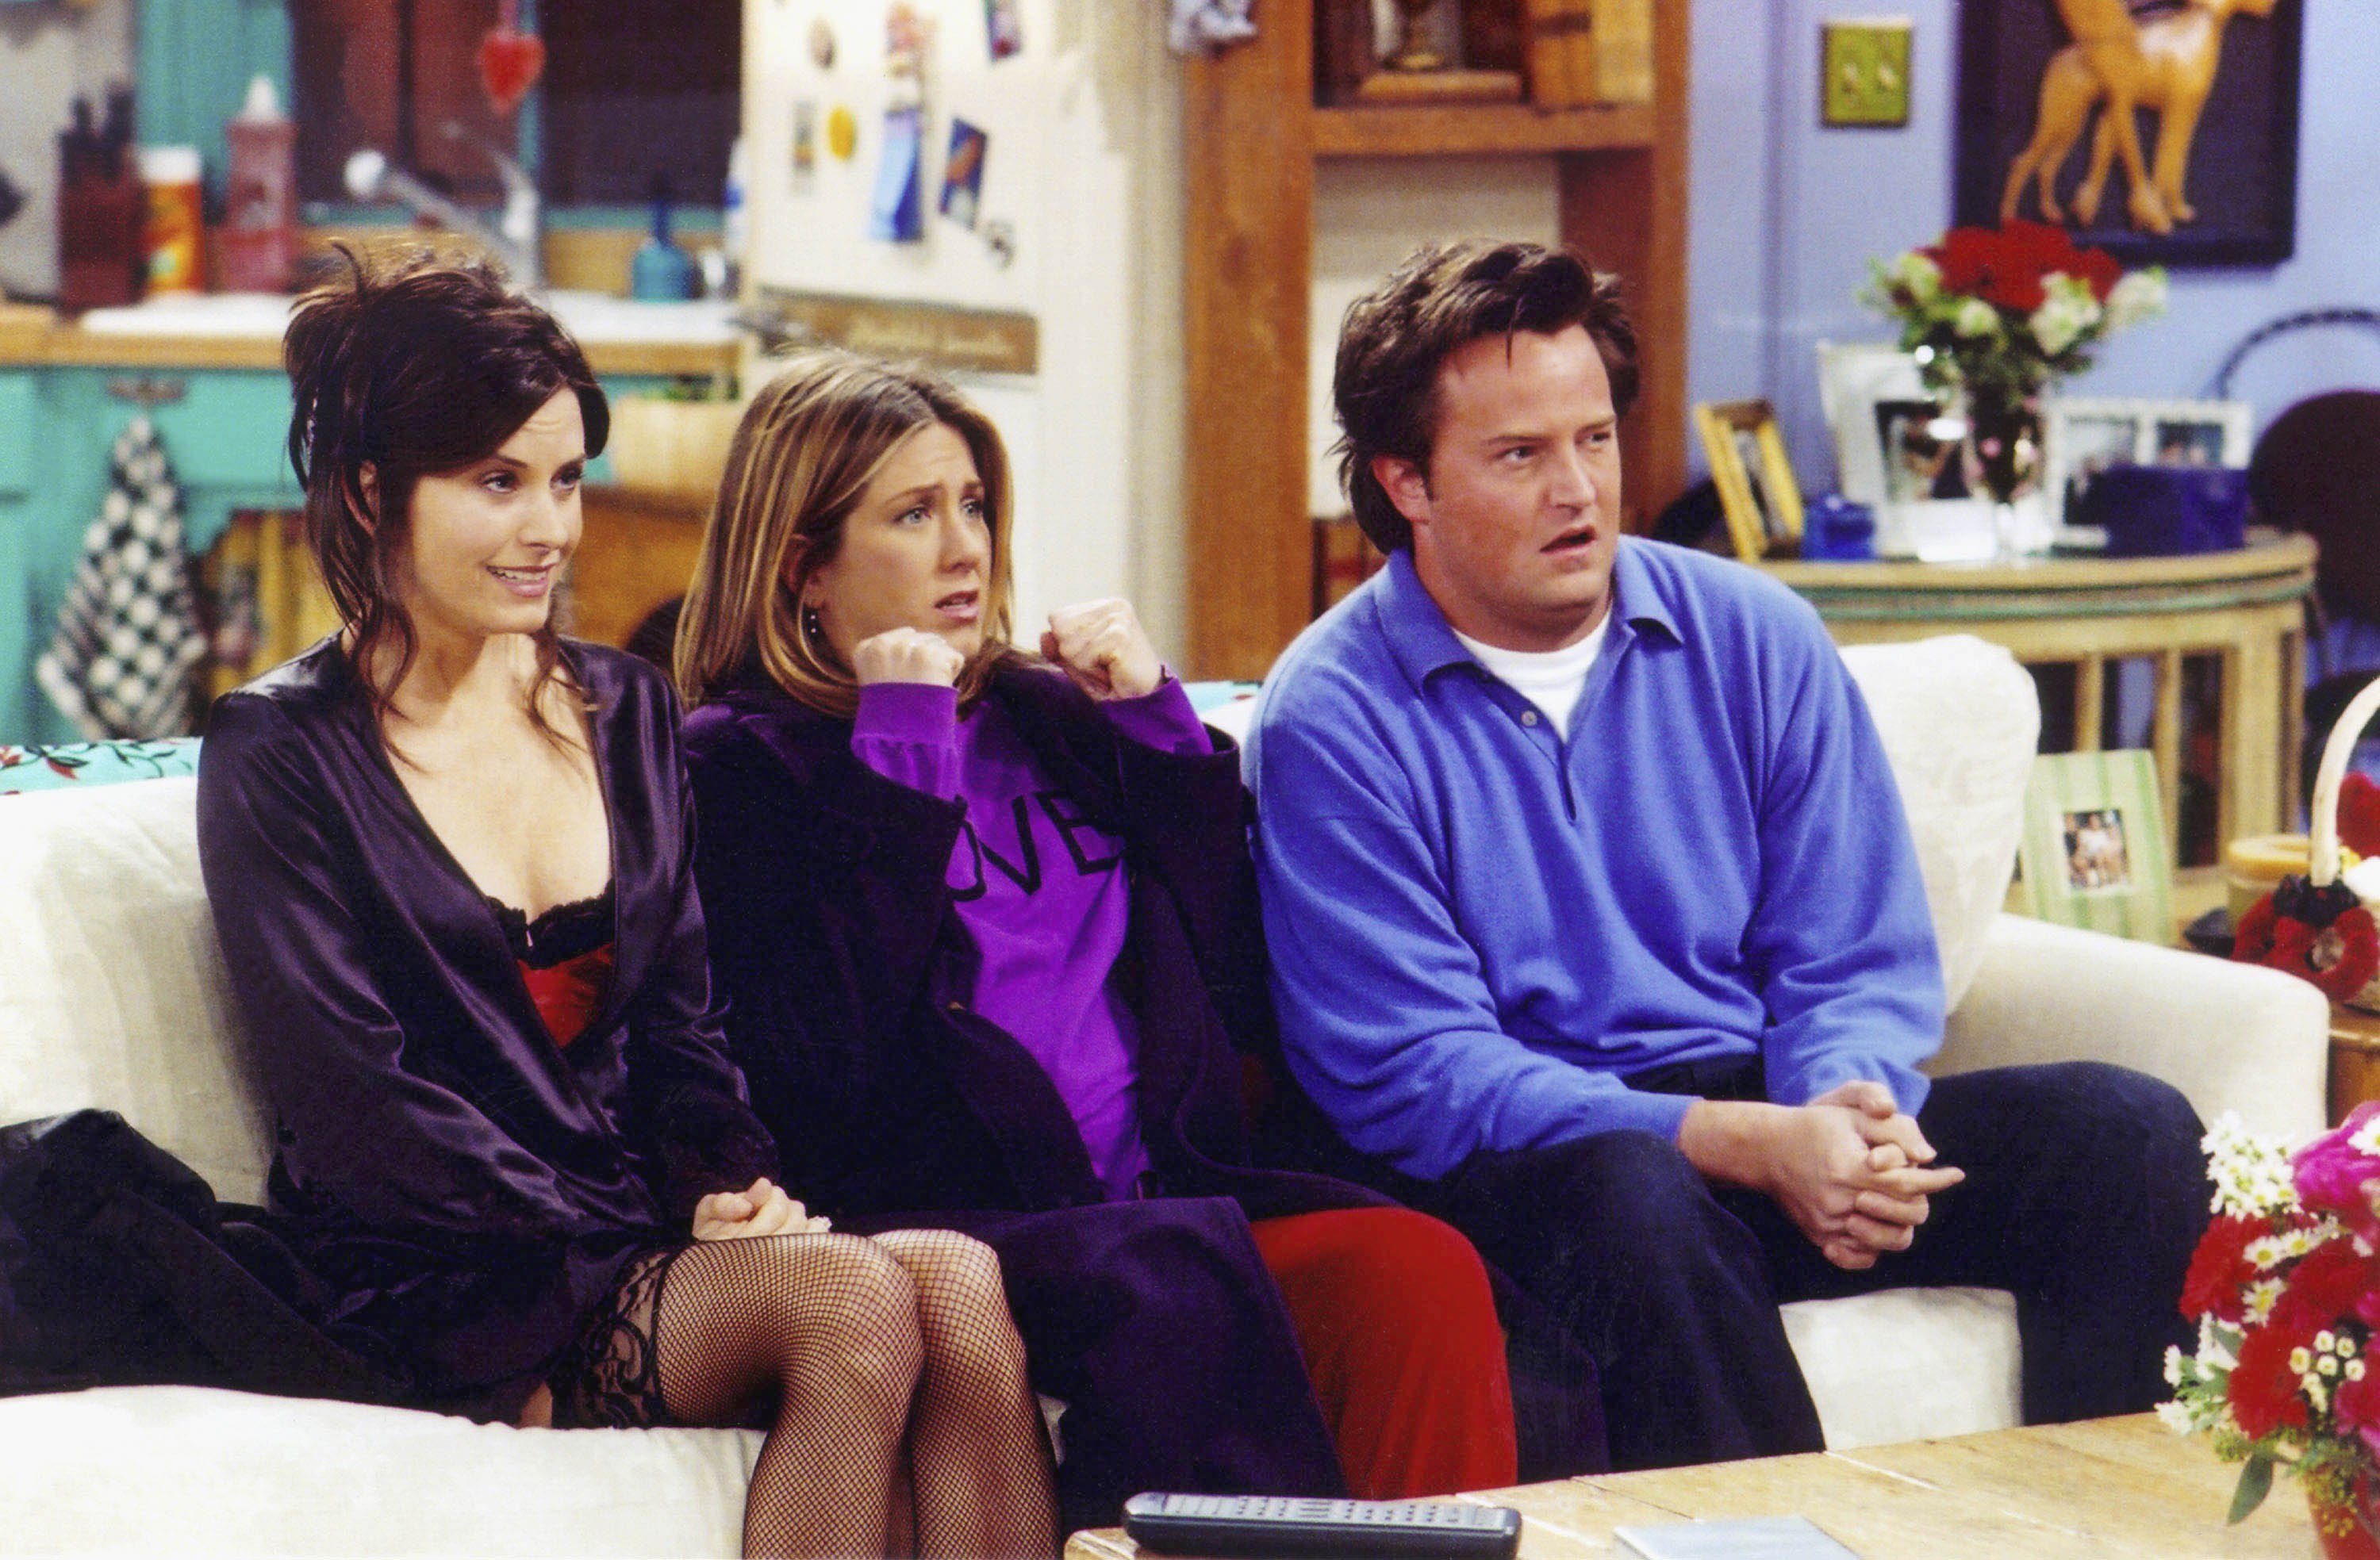 Courteney Cox, Jennifer Aniston, and Matthew Perry during an episode of "Friends," aired on February 2, 2002 | Source: Getty Images